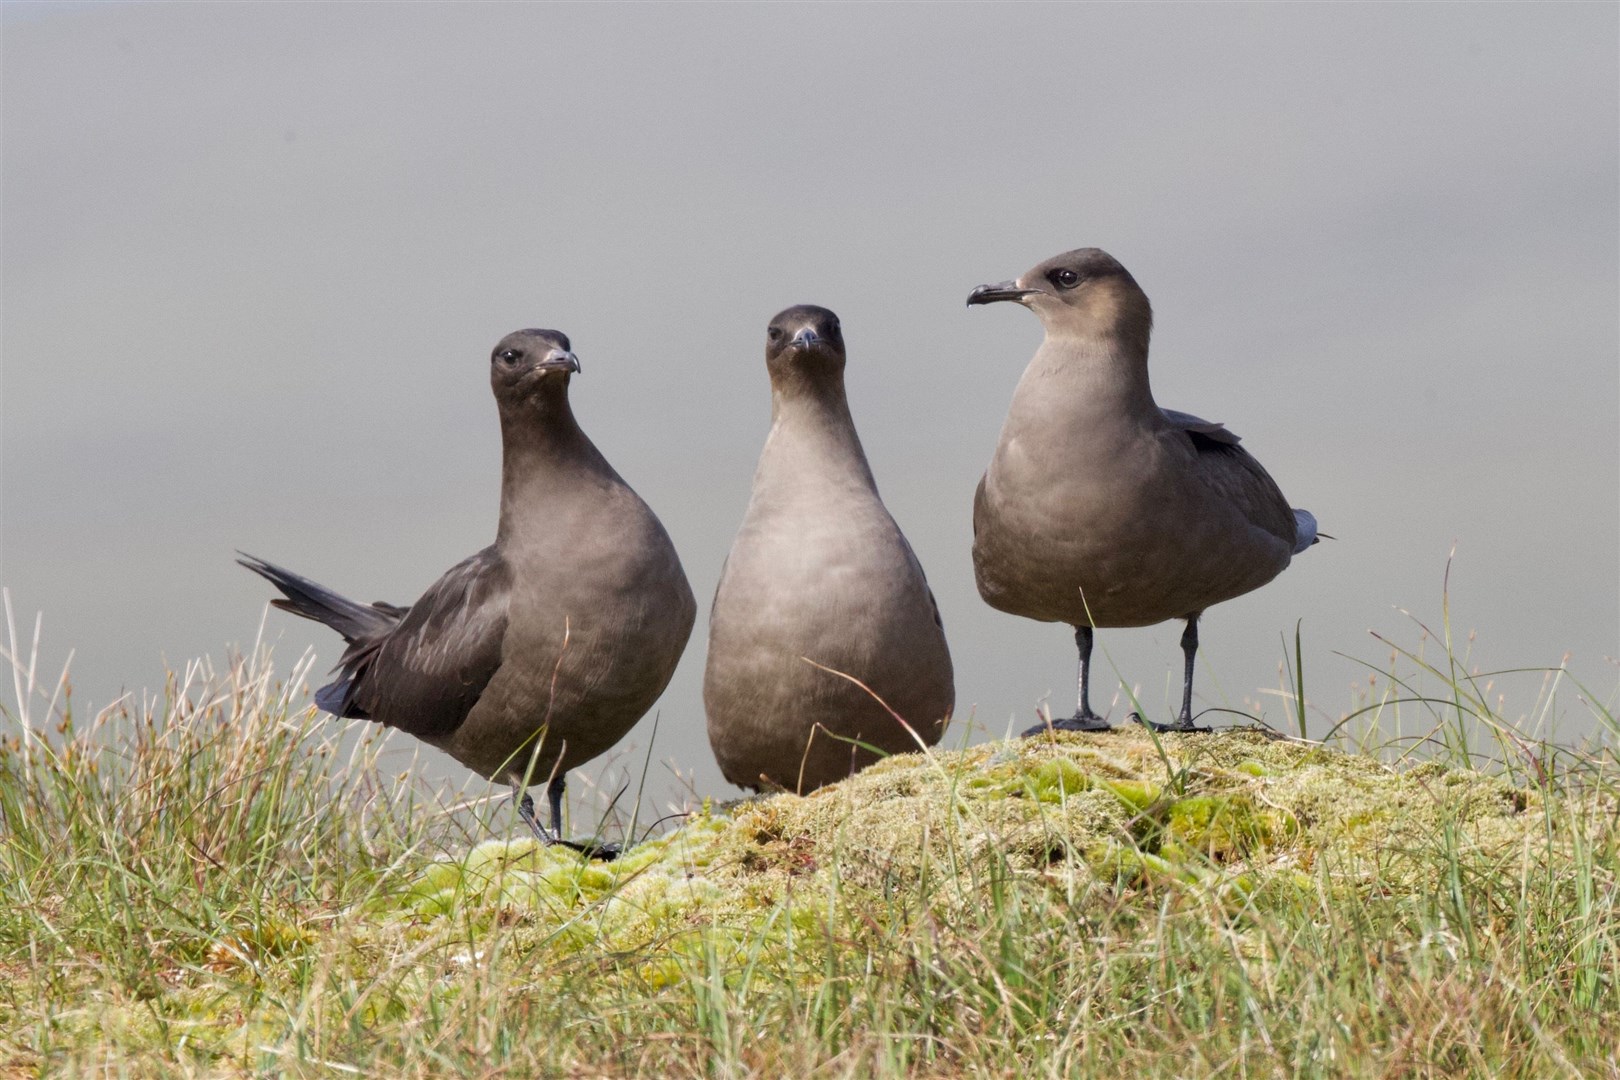 Arctic Skua, photographed by Moray Bird Club committee member, Richard Somers Cocks.